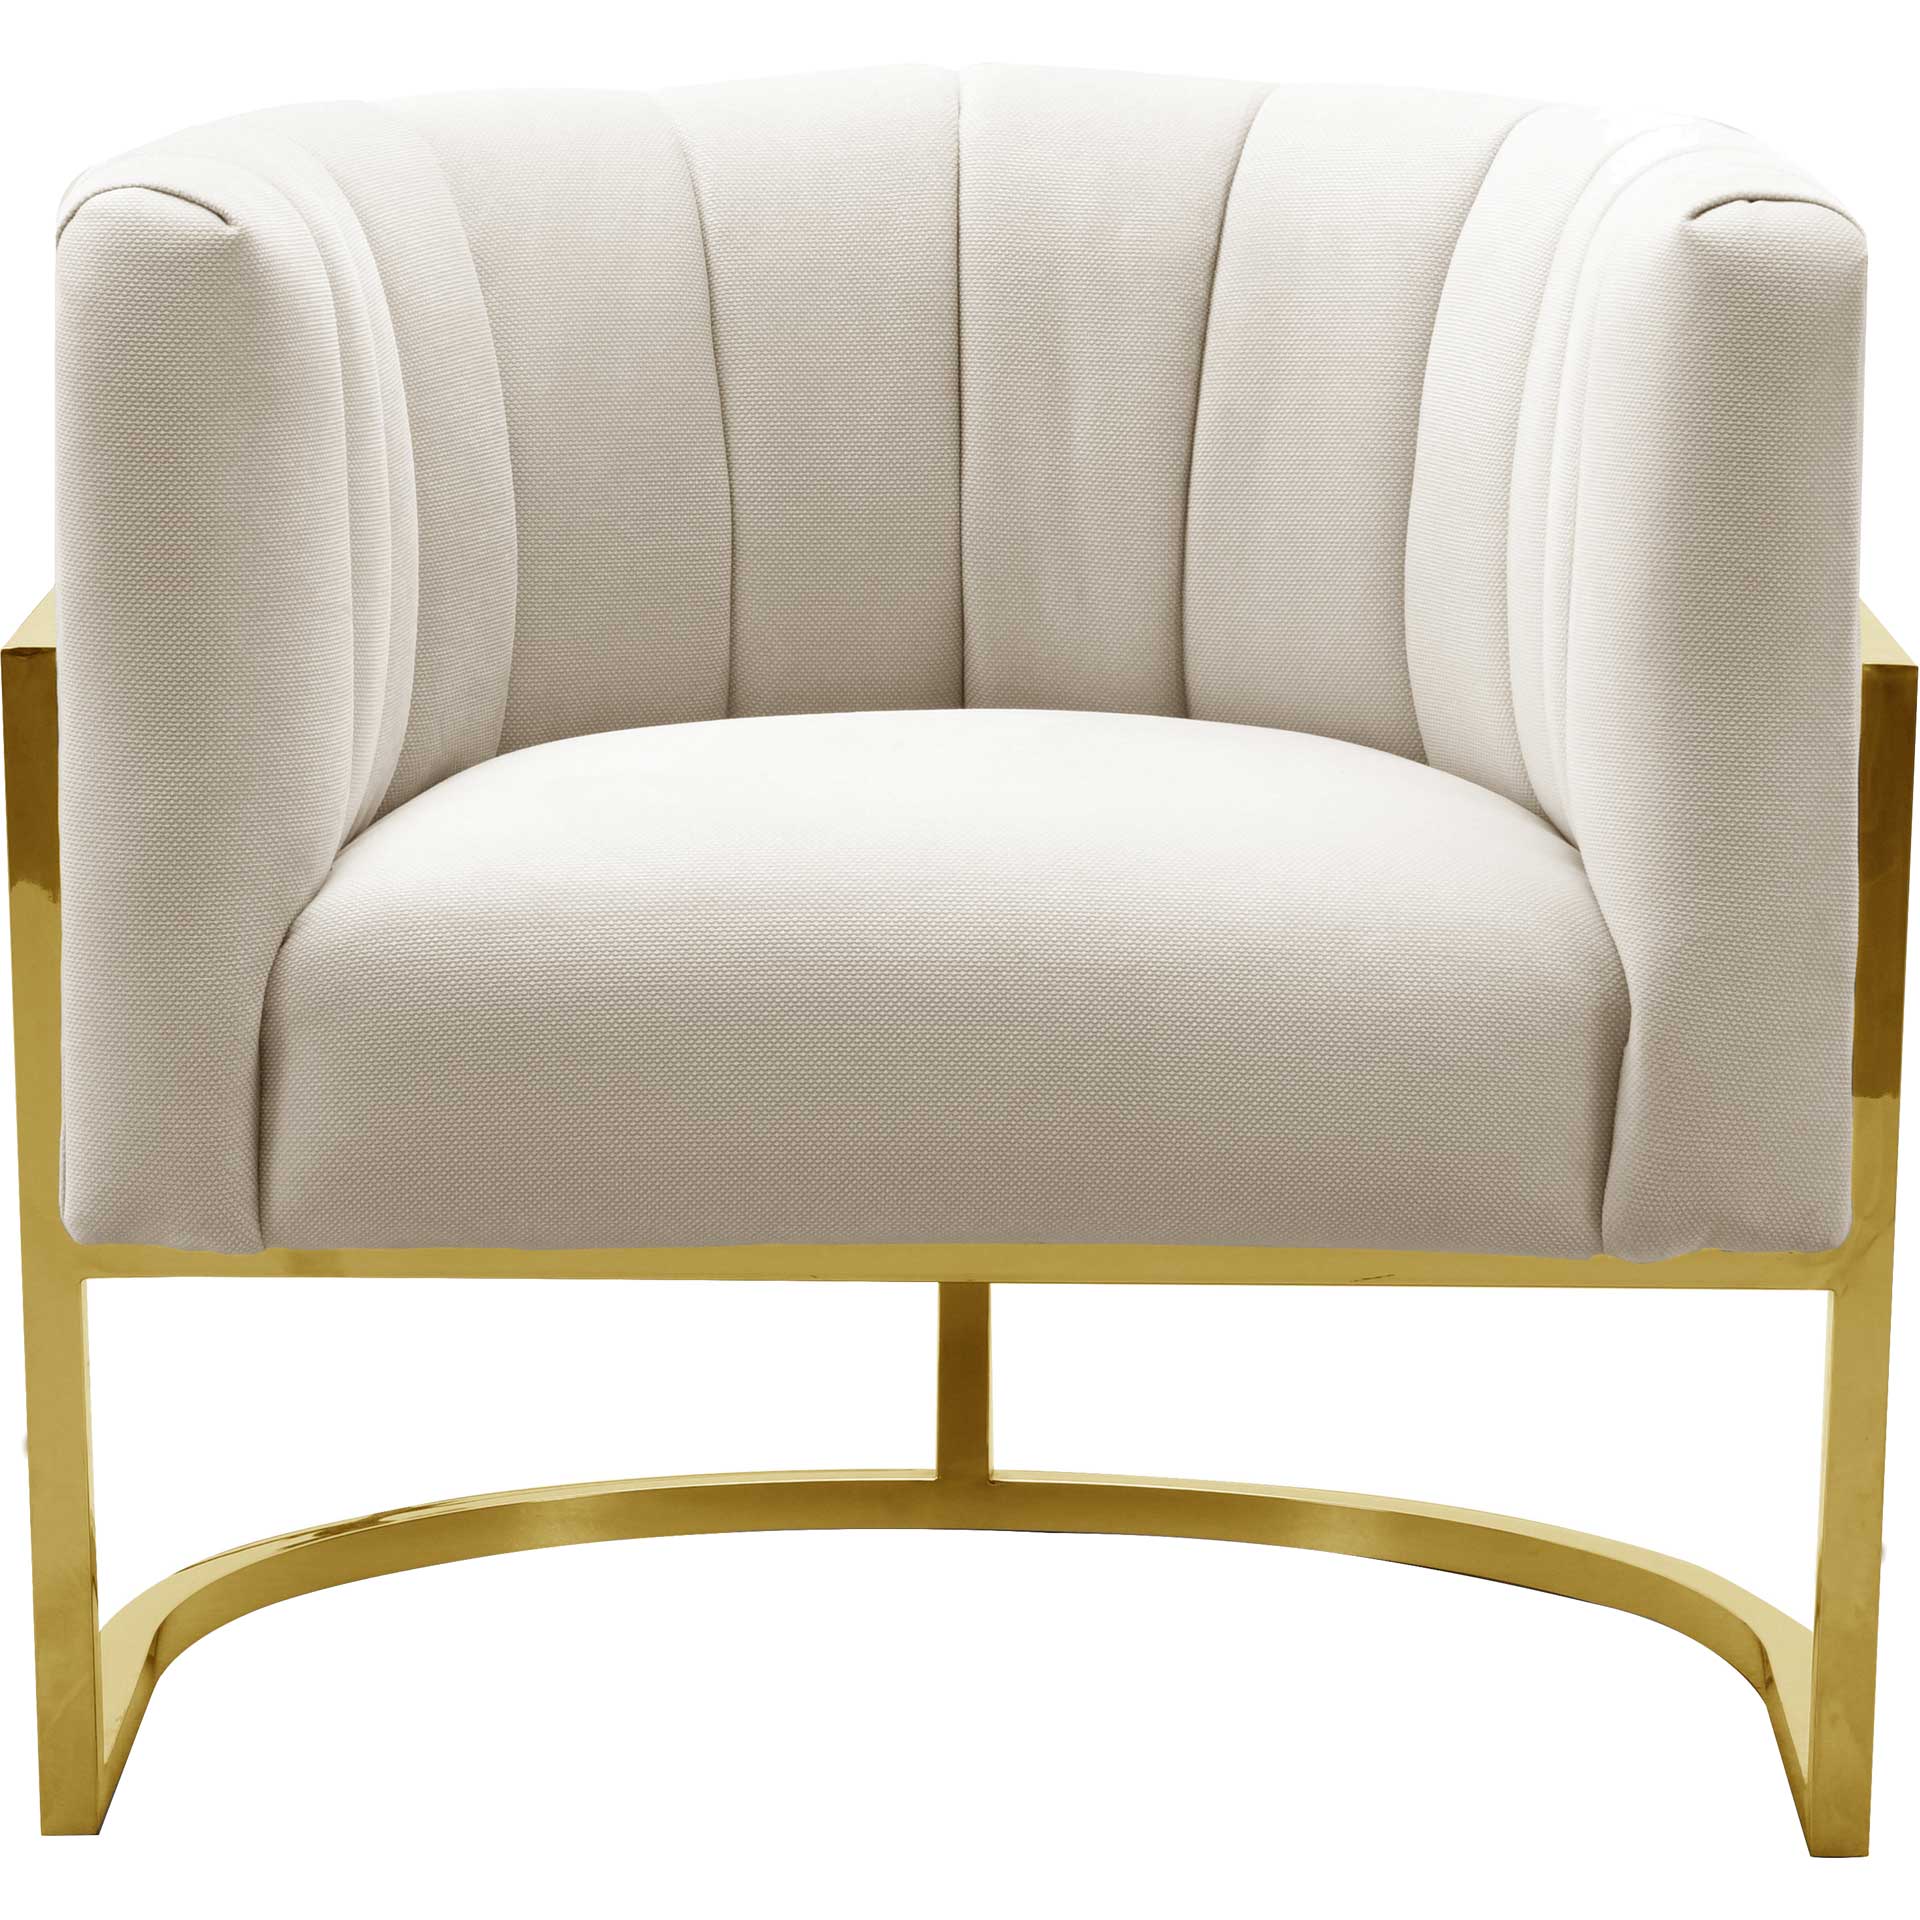 Maddison Spotted Chair Cream/Gold